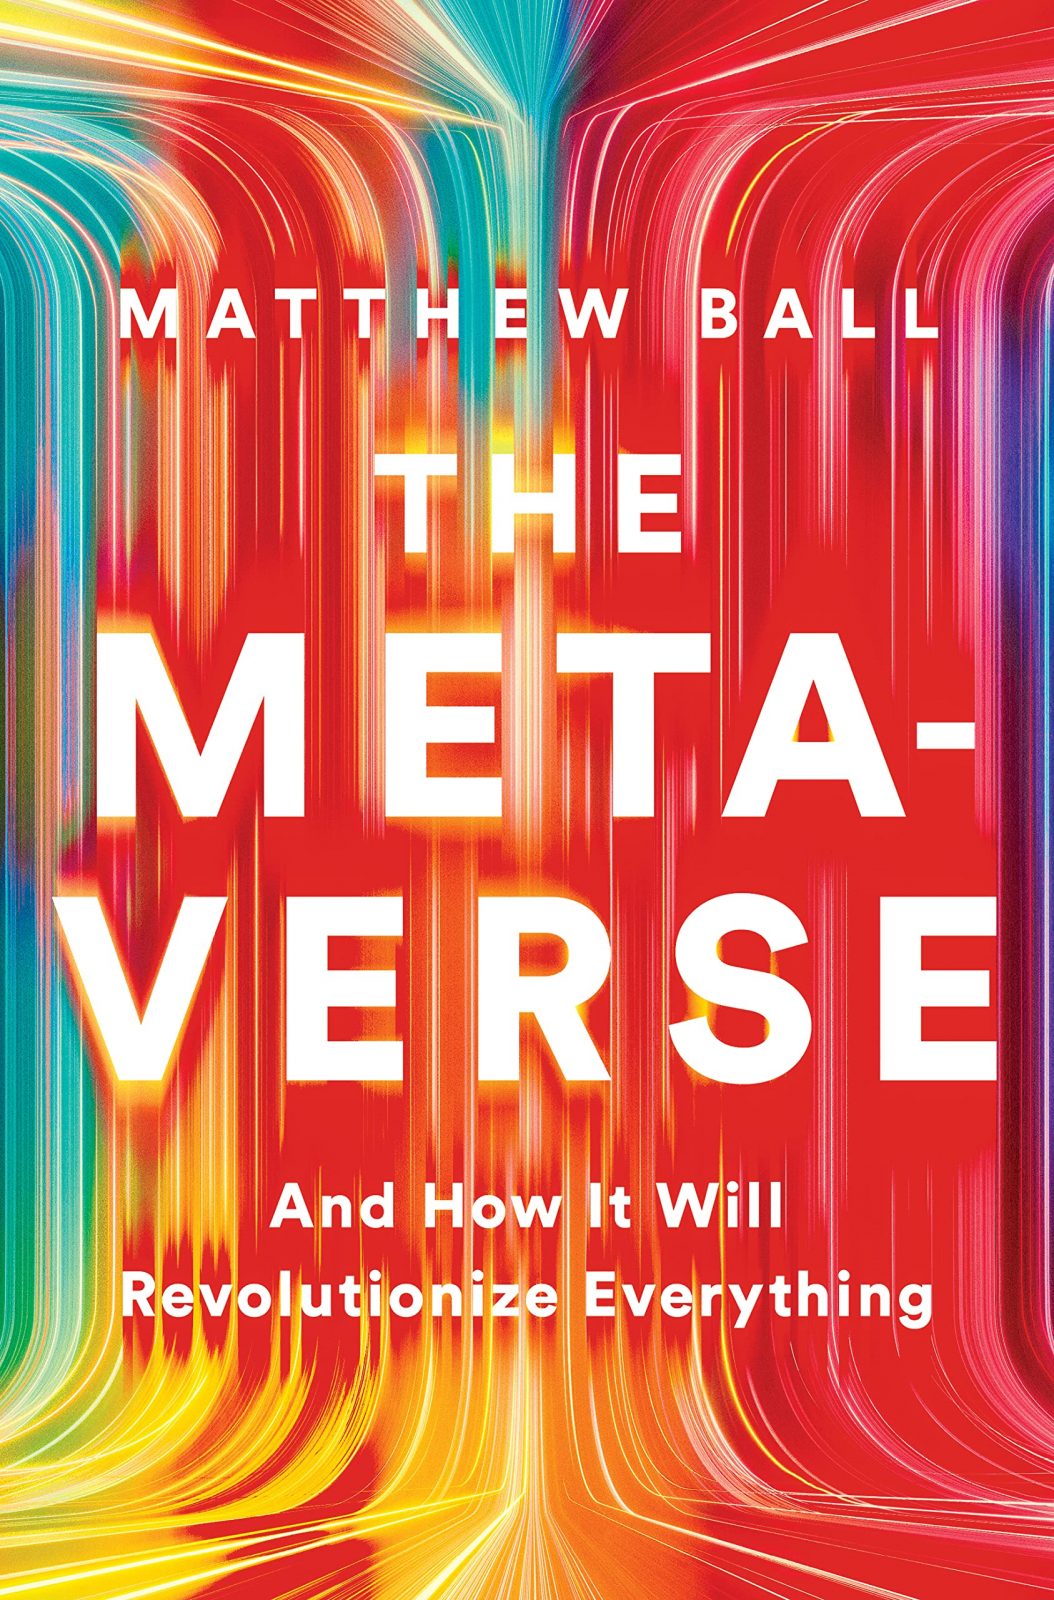 metaverse book of the week aubg library